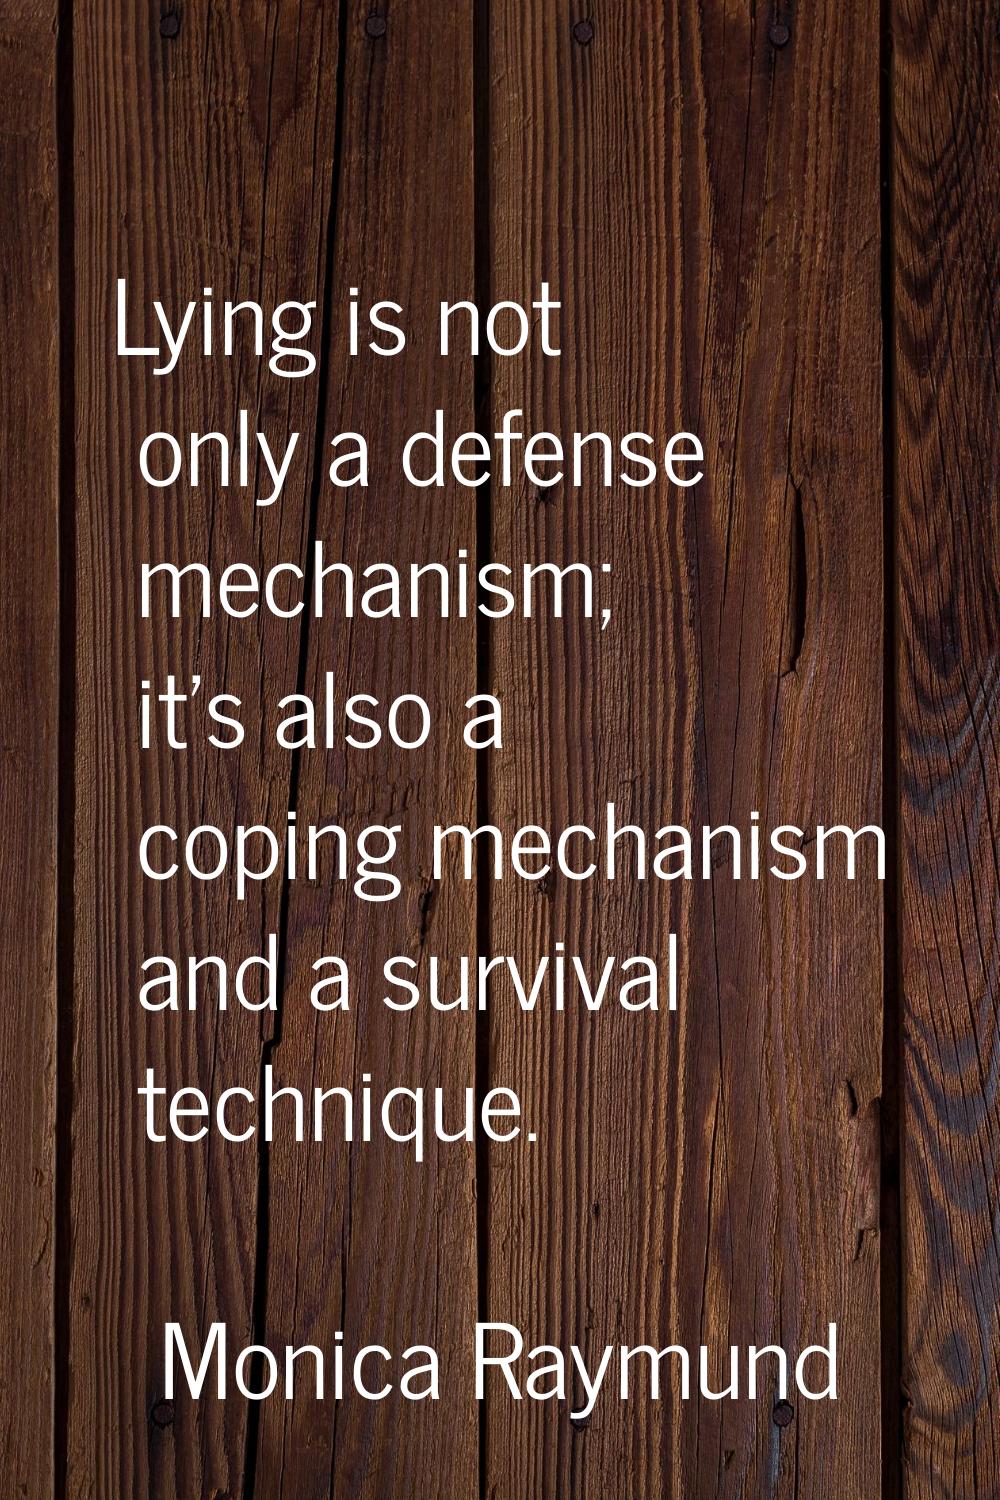 Lying is not only a defense mechanism; it's also a coping mechanism and a survival technique.